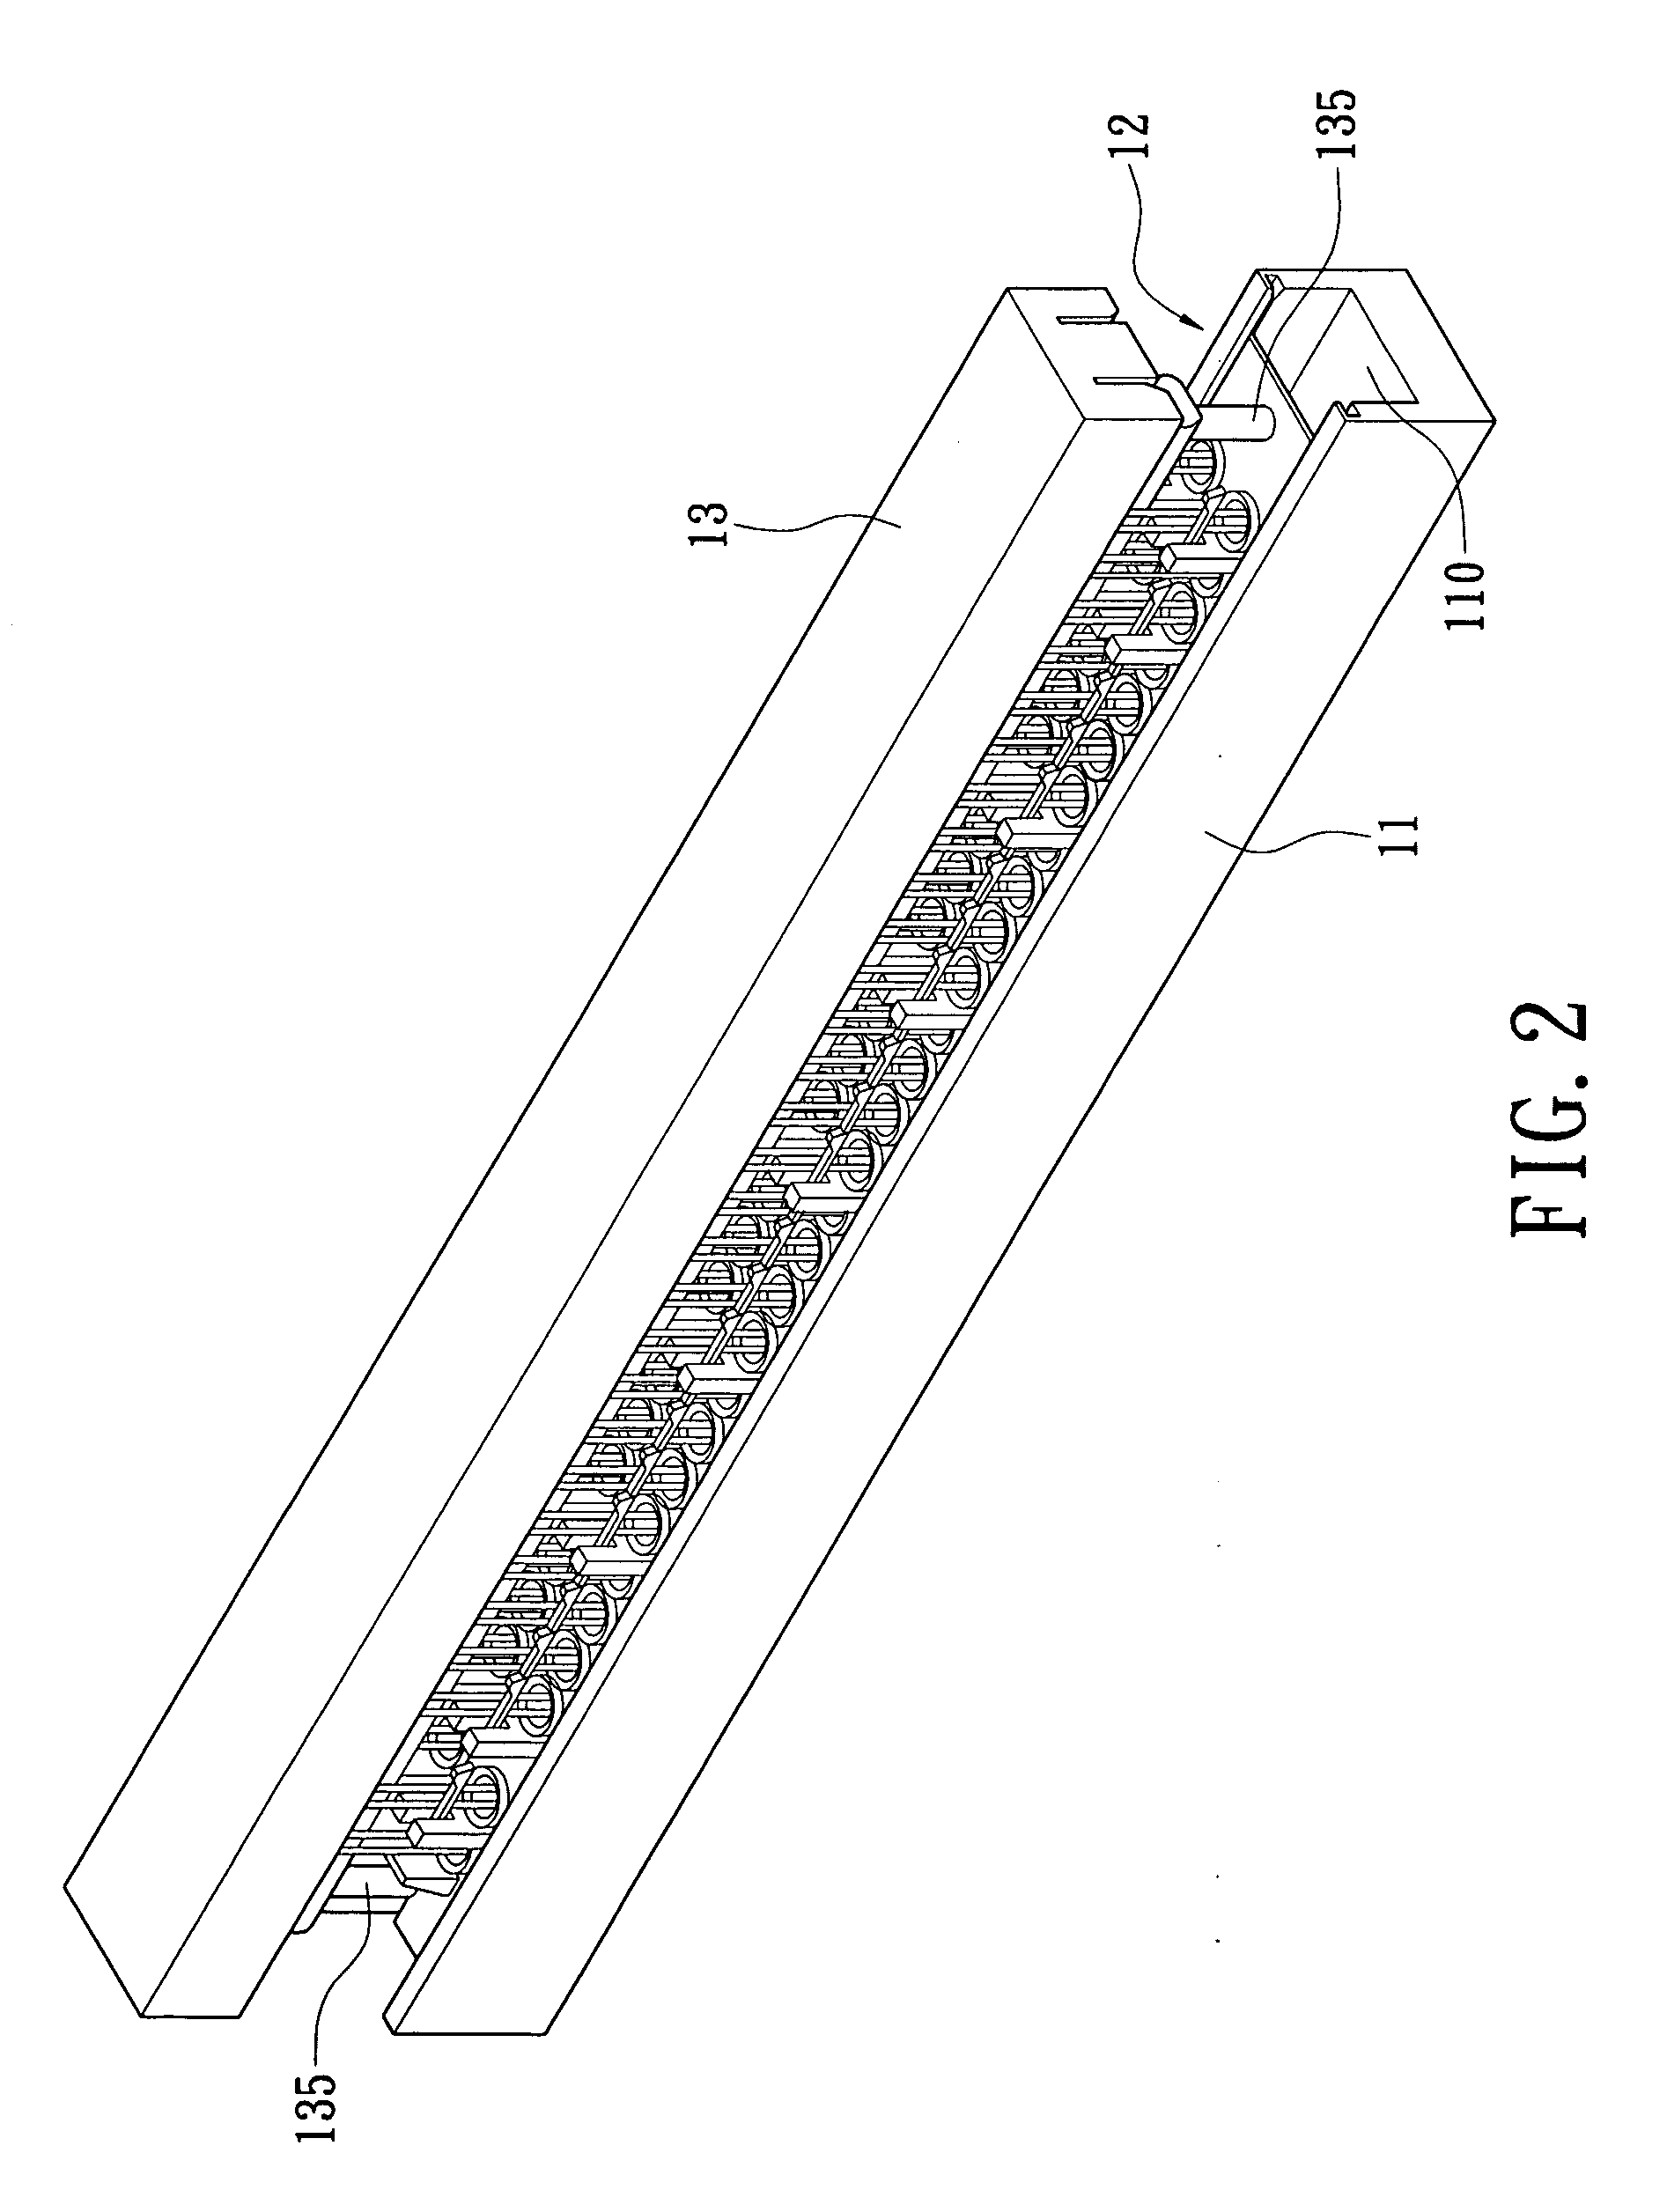 Packaging apparatus for optical-electronic semiconductors and a packaging method therefor